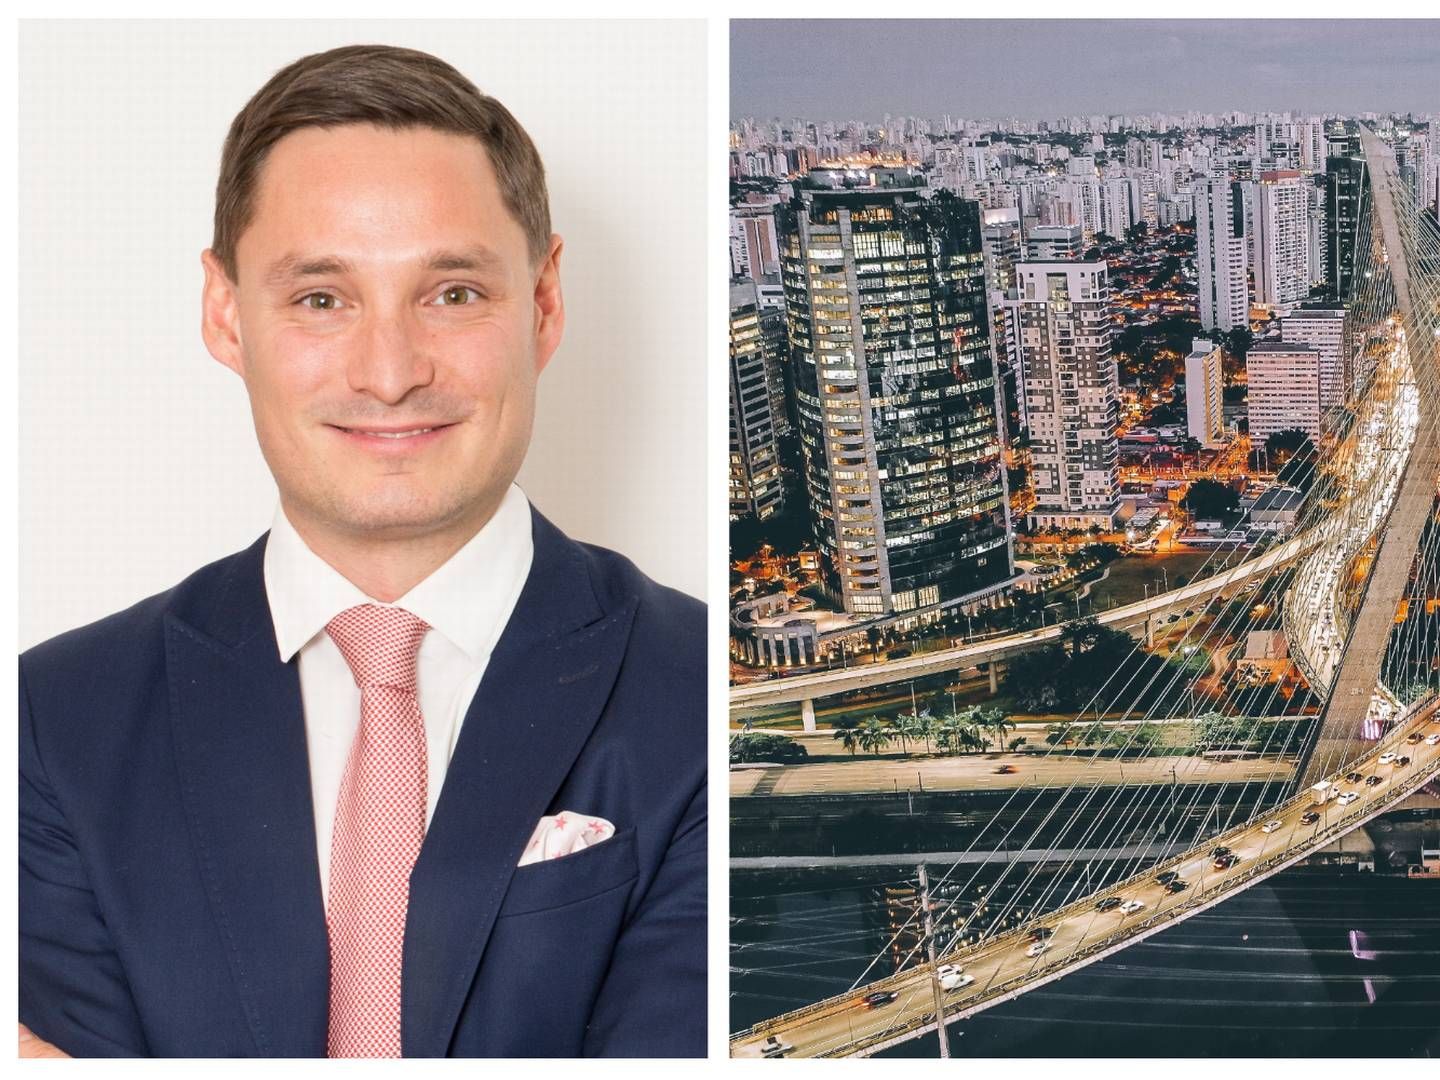 Jonathan Aalto manages Seligson & Co's Latin America-focused fund together with Sao Paolo-based Tropico Latin America Investments. | Photo: PR: Seligson & Co and Pexels: Sergio Souza.